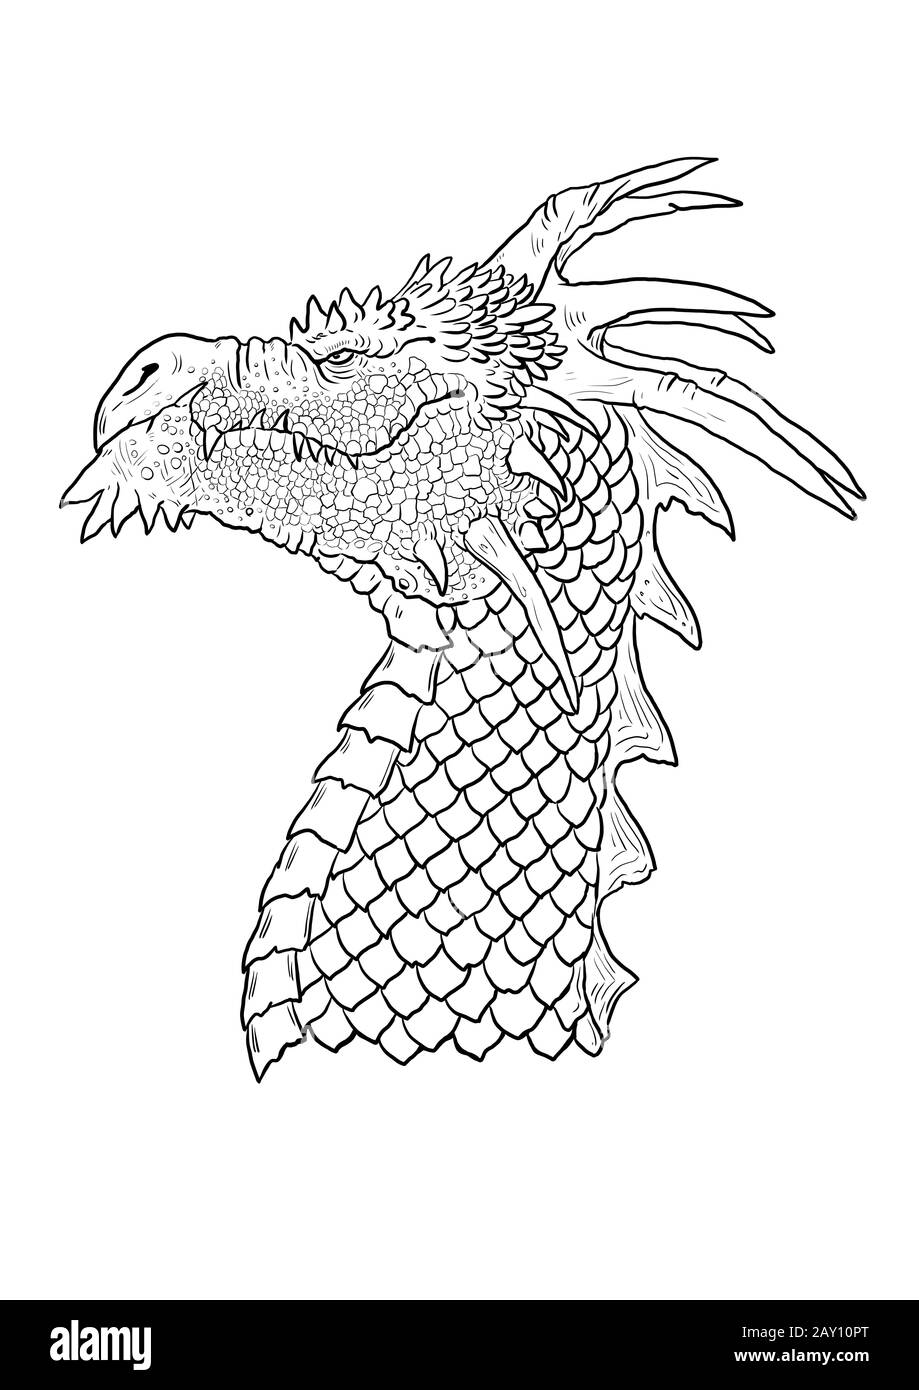 Dragon coloring page outline illustration dragon drawing coloring sheet stock photo